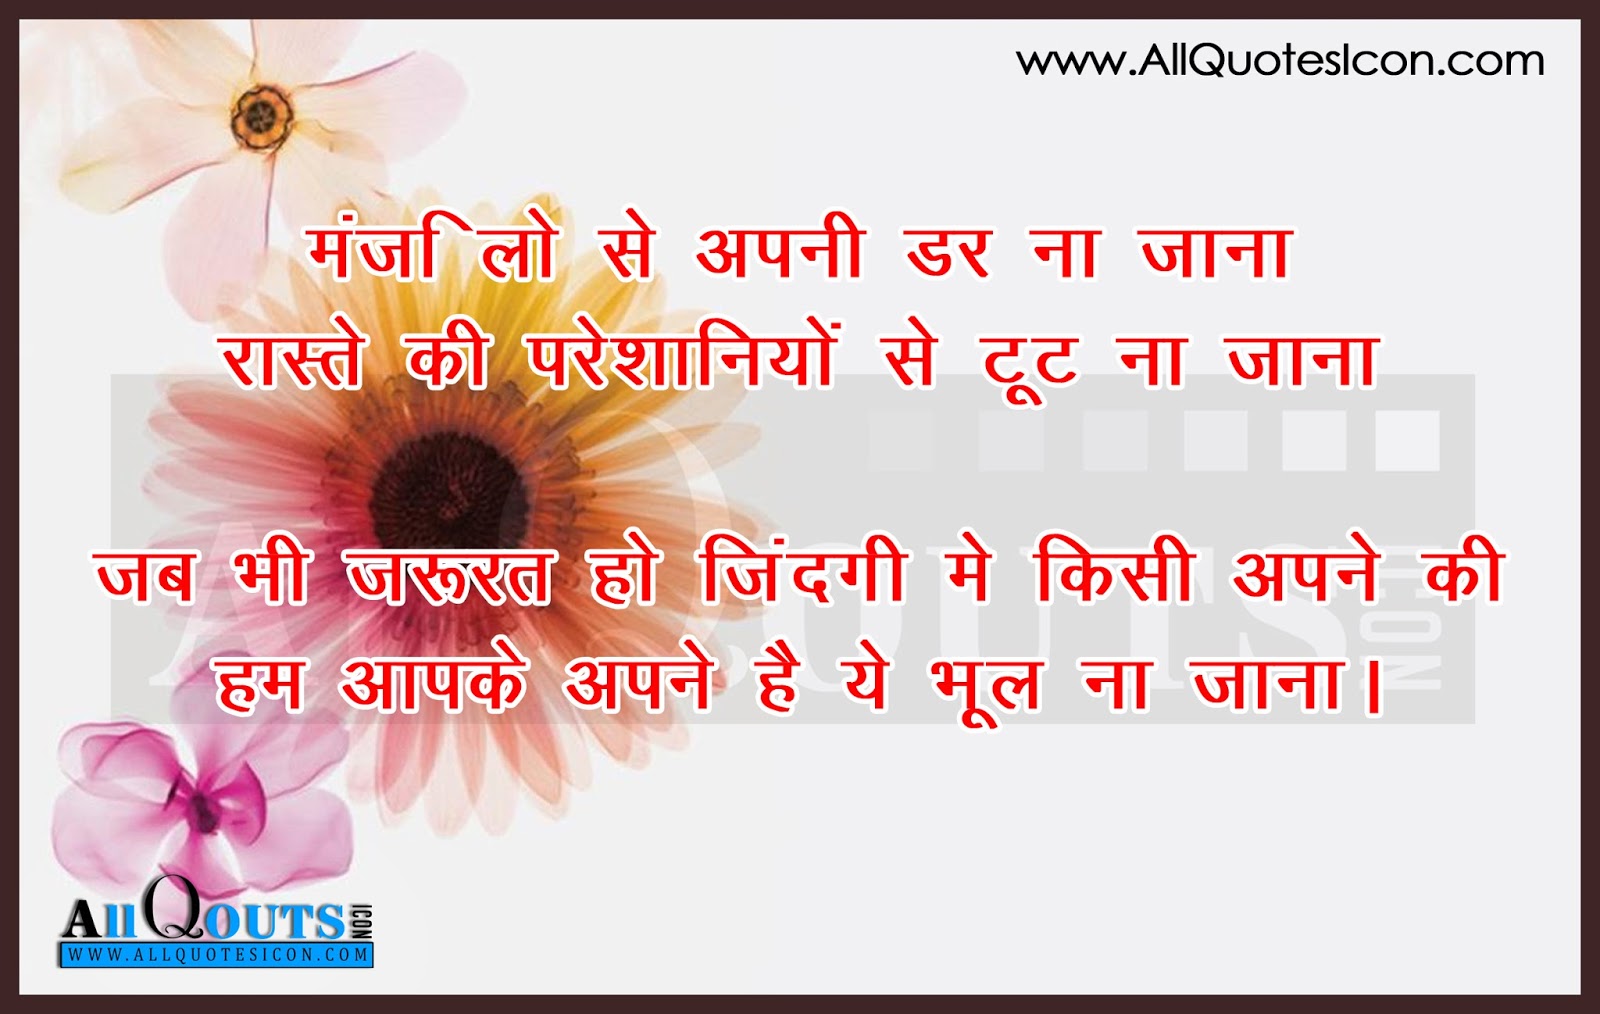 Hindi Shayari Images Wallpapers Pictures Photos - Best Romantic Quotes In Hindi . (1600x1014)